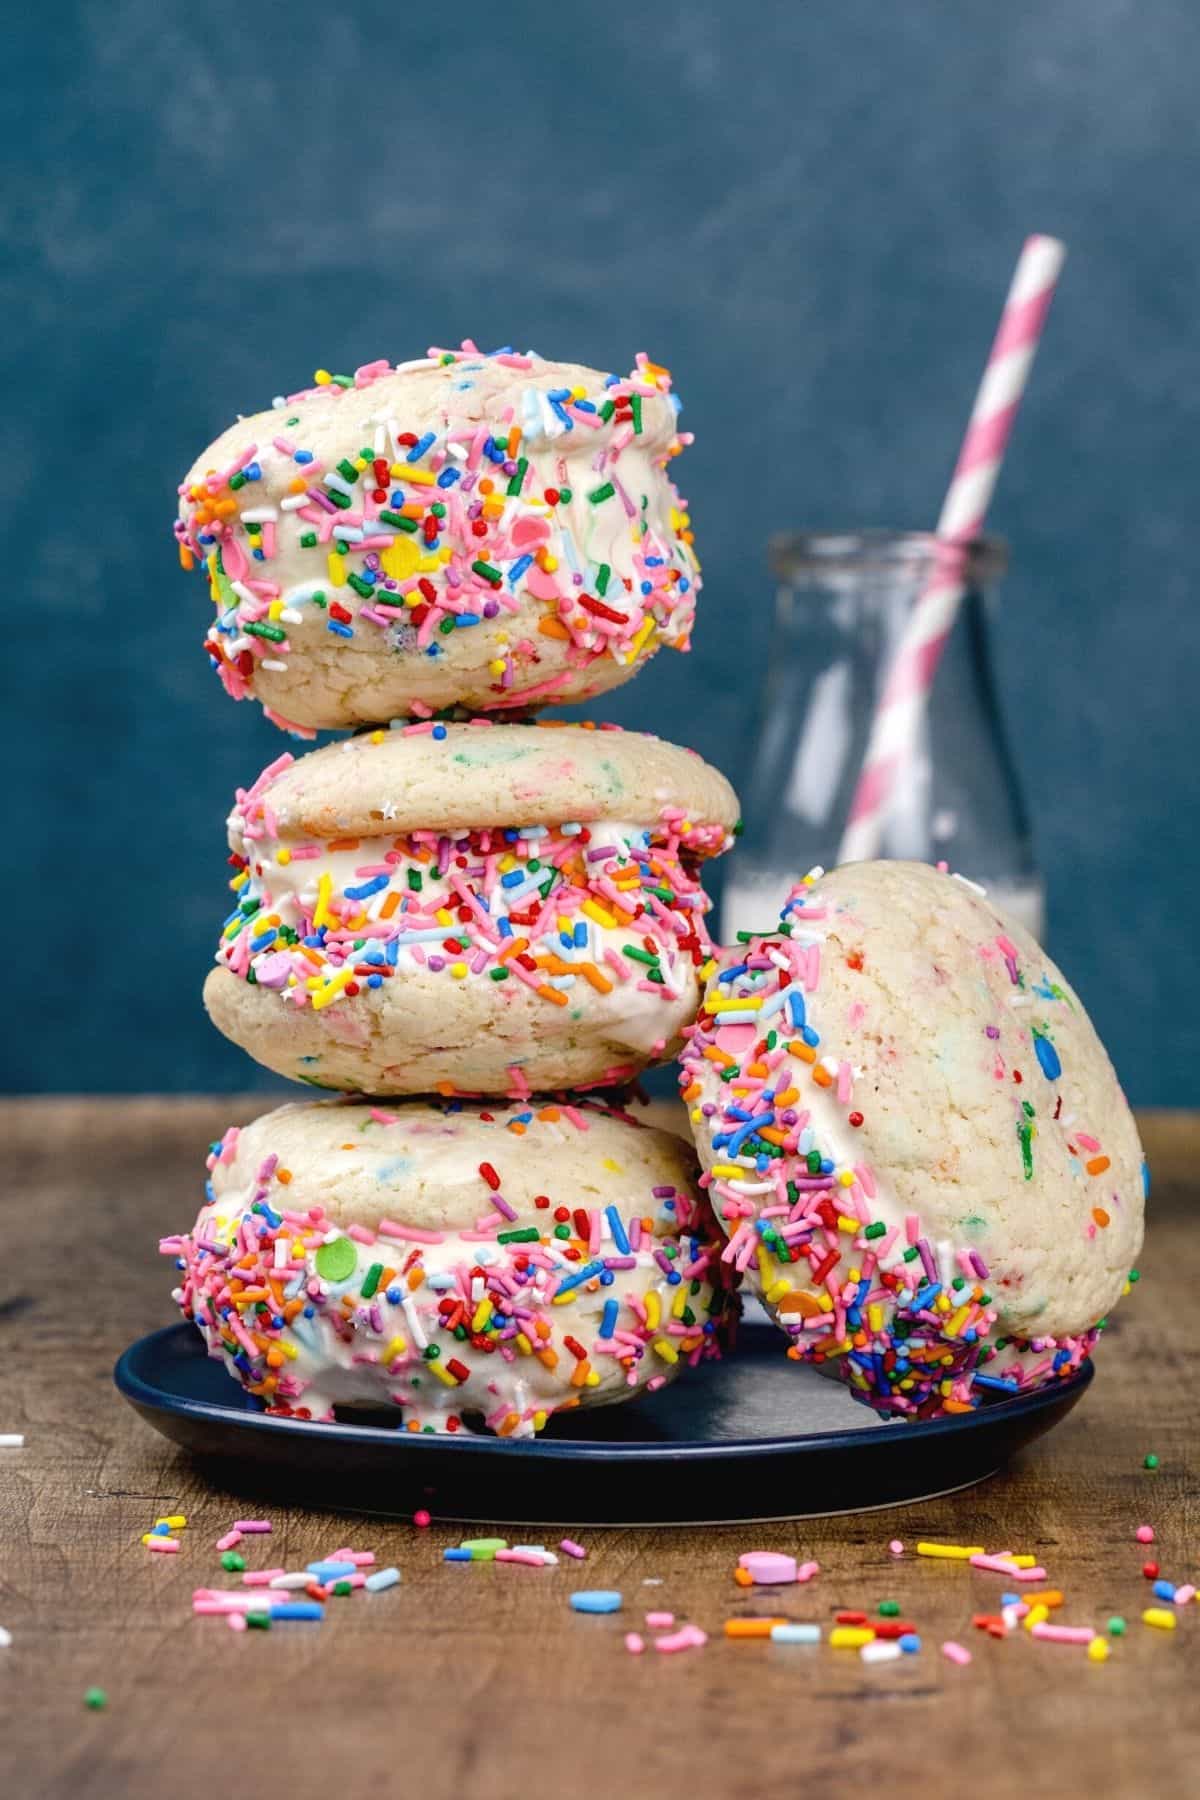 a stack of 4 ice cream sandwiches with rainbow sprinkles on a dark blue plate in front of a glass of milk with a pink straw blurred in the background